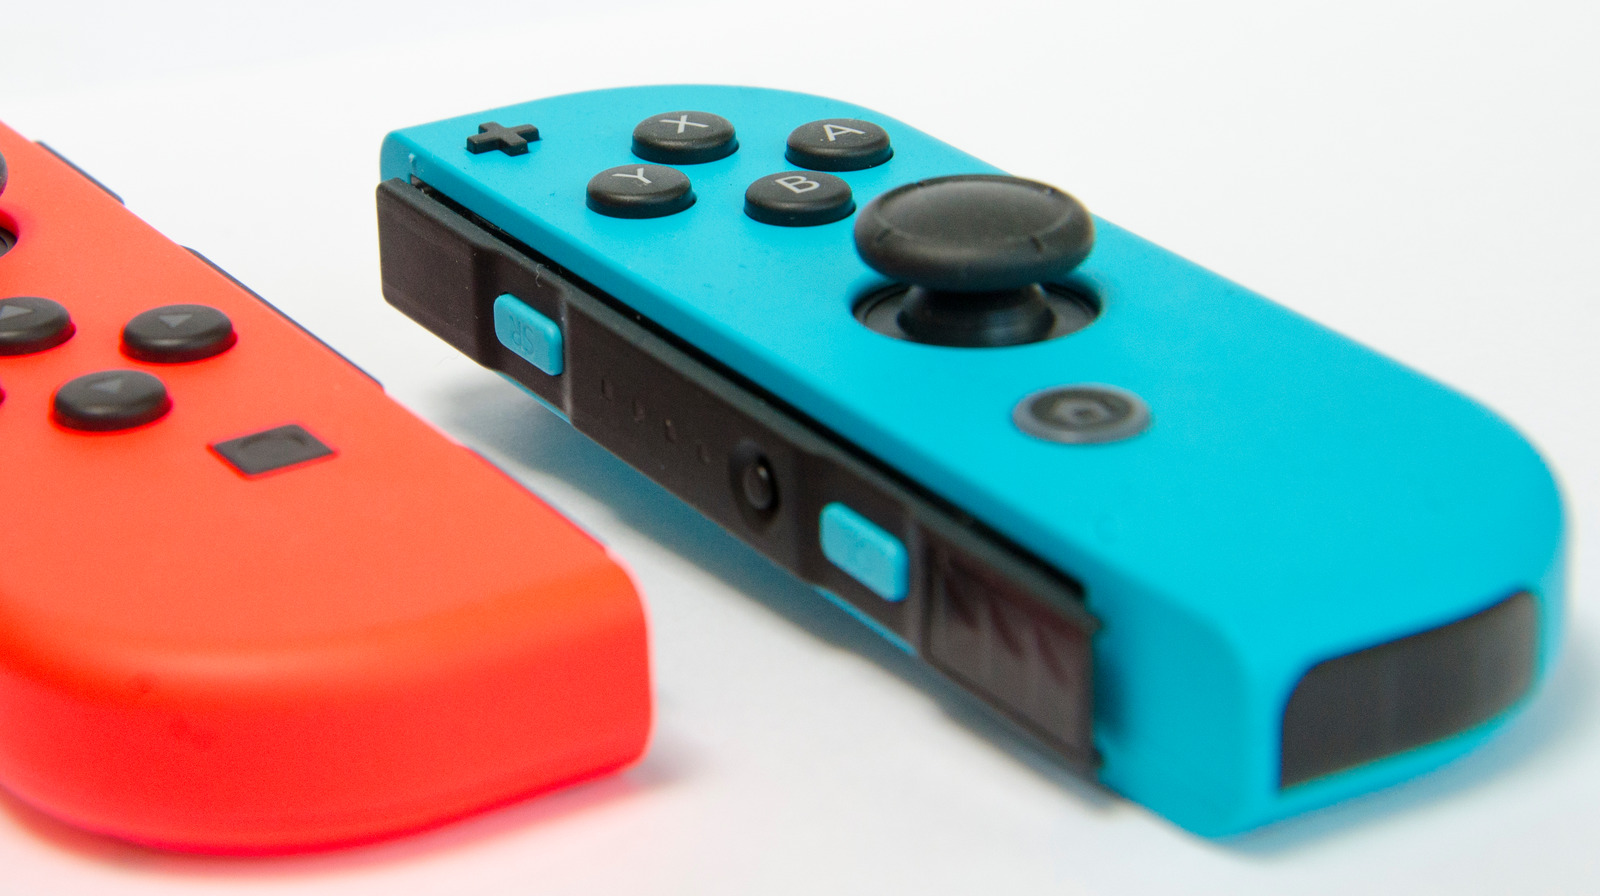 Næb kirurg par The Forgotten Nintendo Switch Joy-Con IR Feature Is Made For Select Games